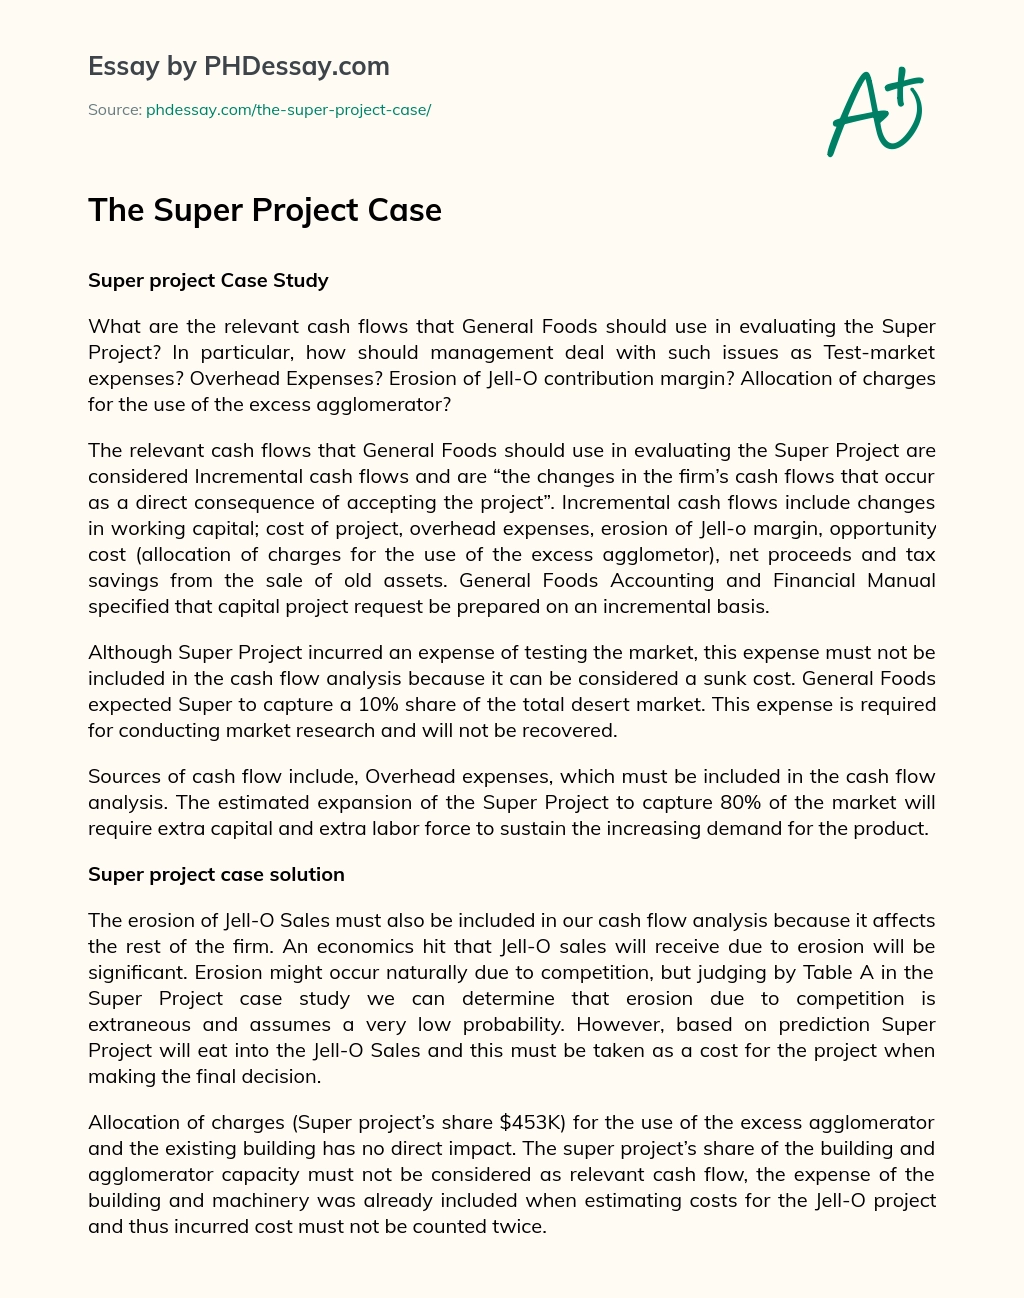 The Super Project Case essay